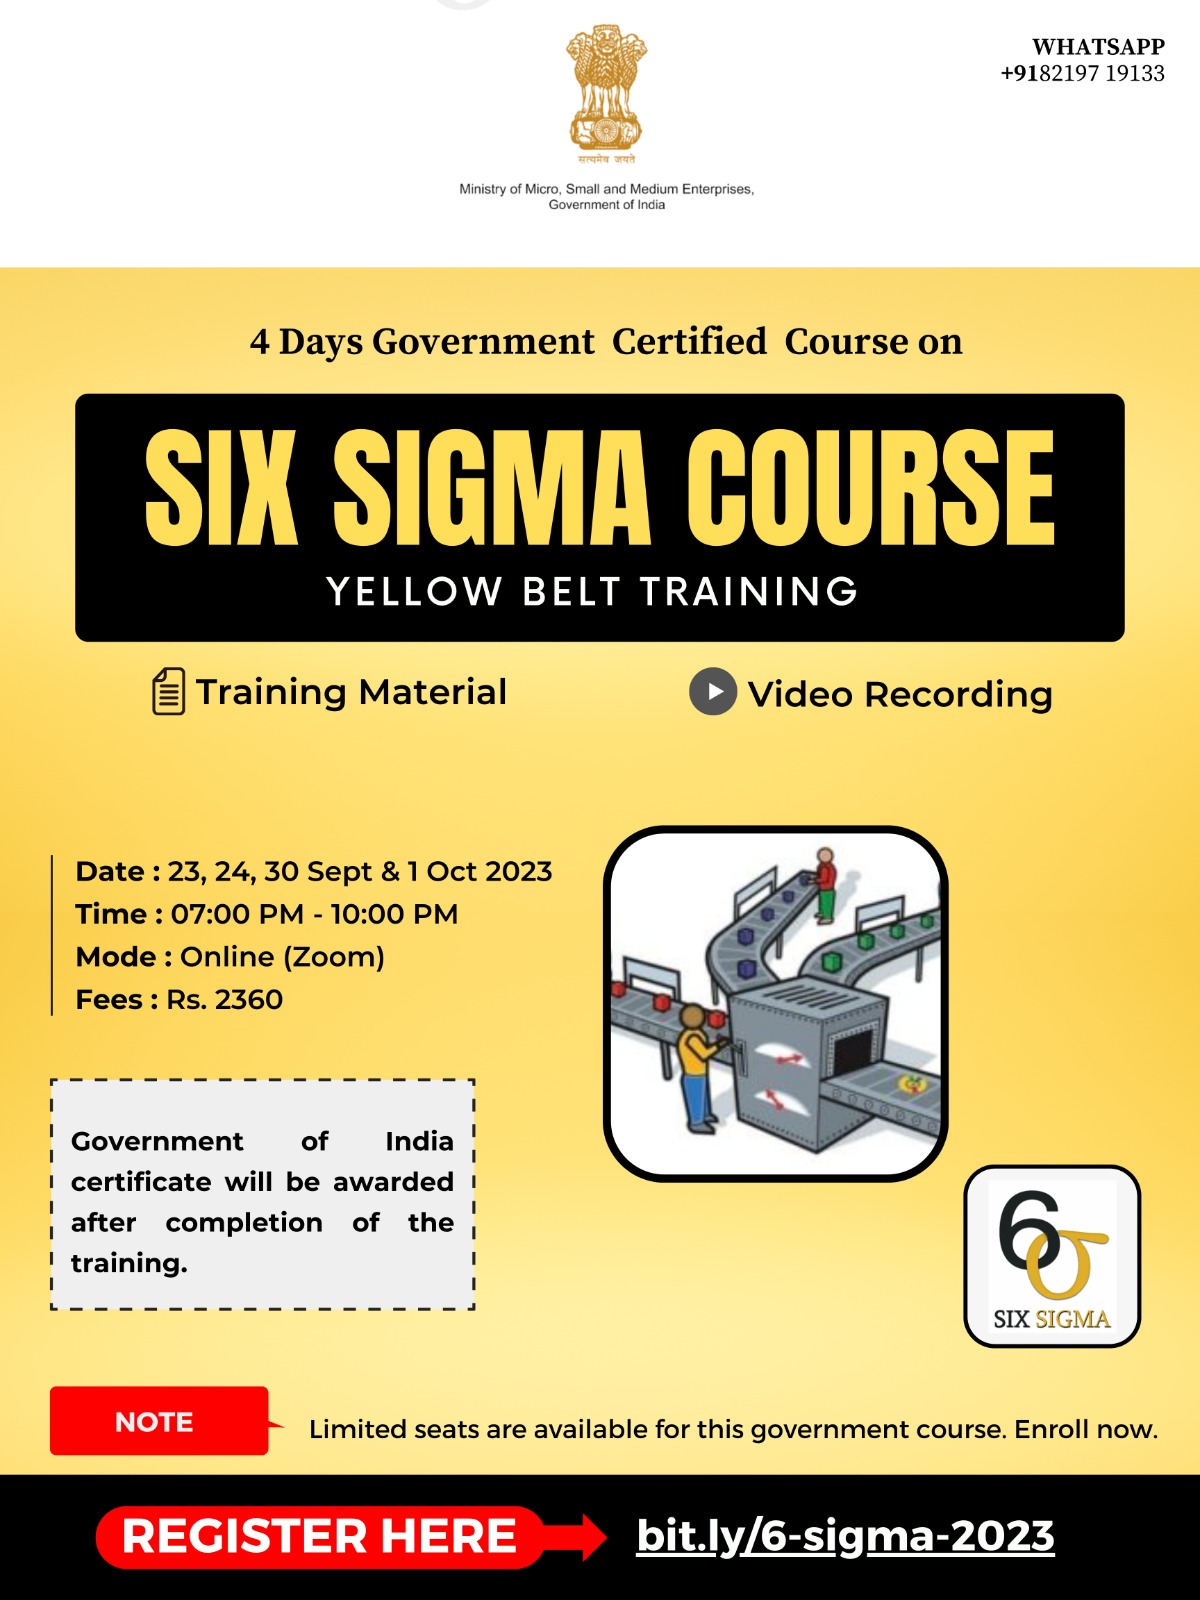 Six Sigma Yellow Belt Training by MSME, Govt of India - Check eligibility, training dates, syllabus, exam pattern, fee structure over here | KATTUFOODTECH